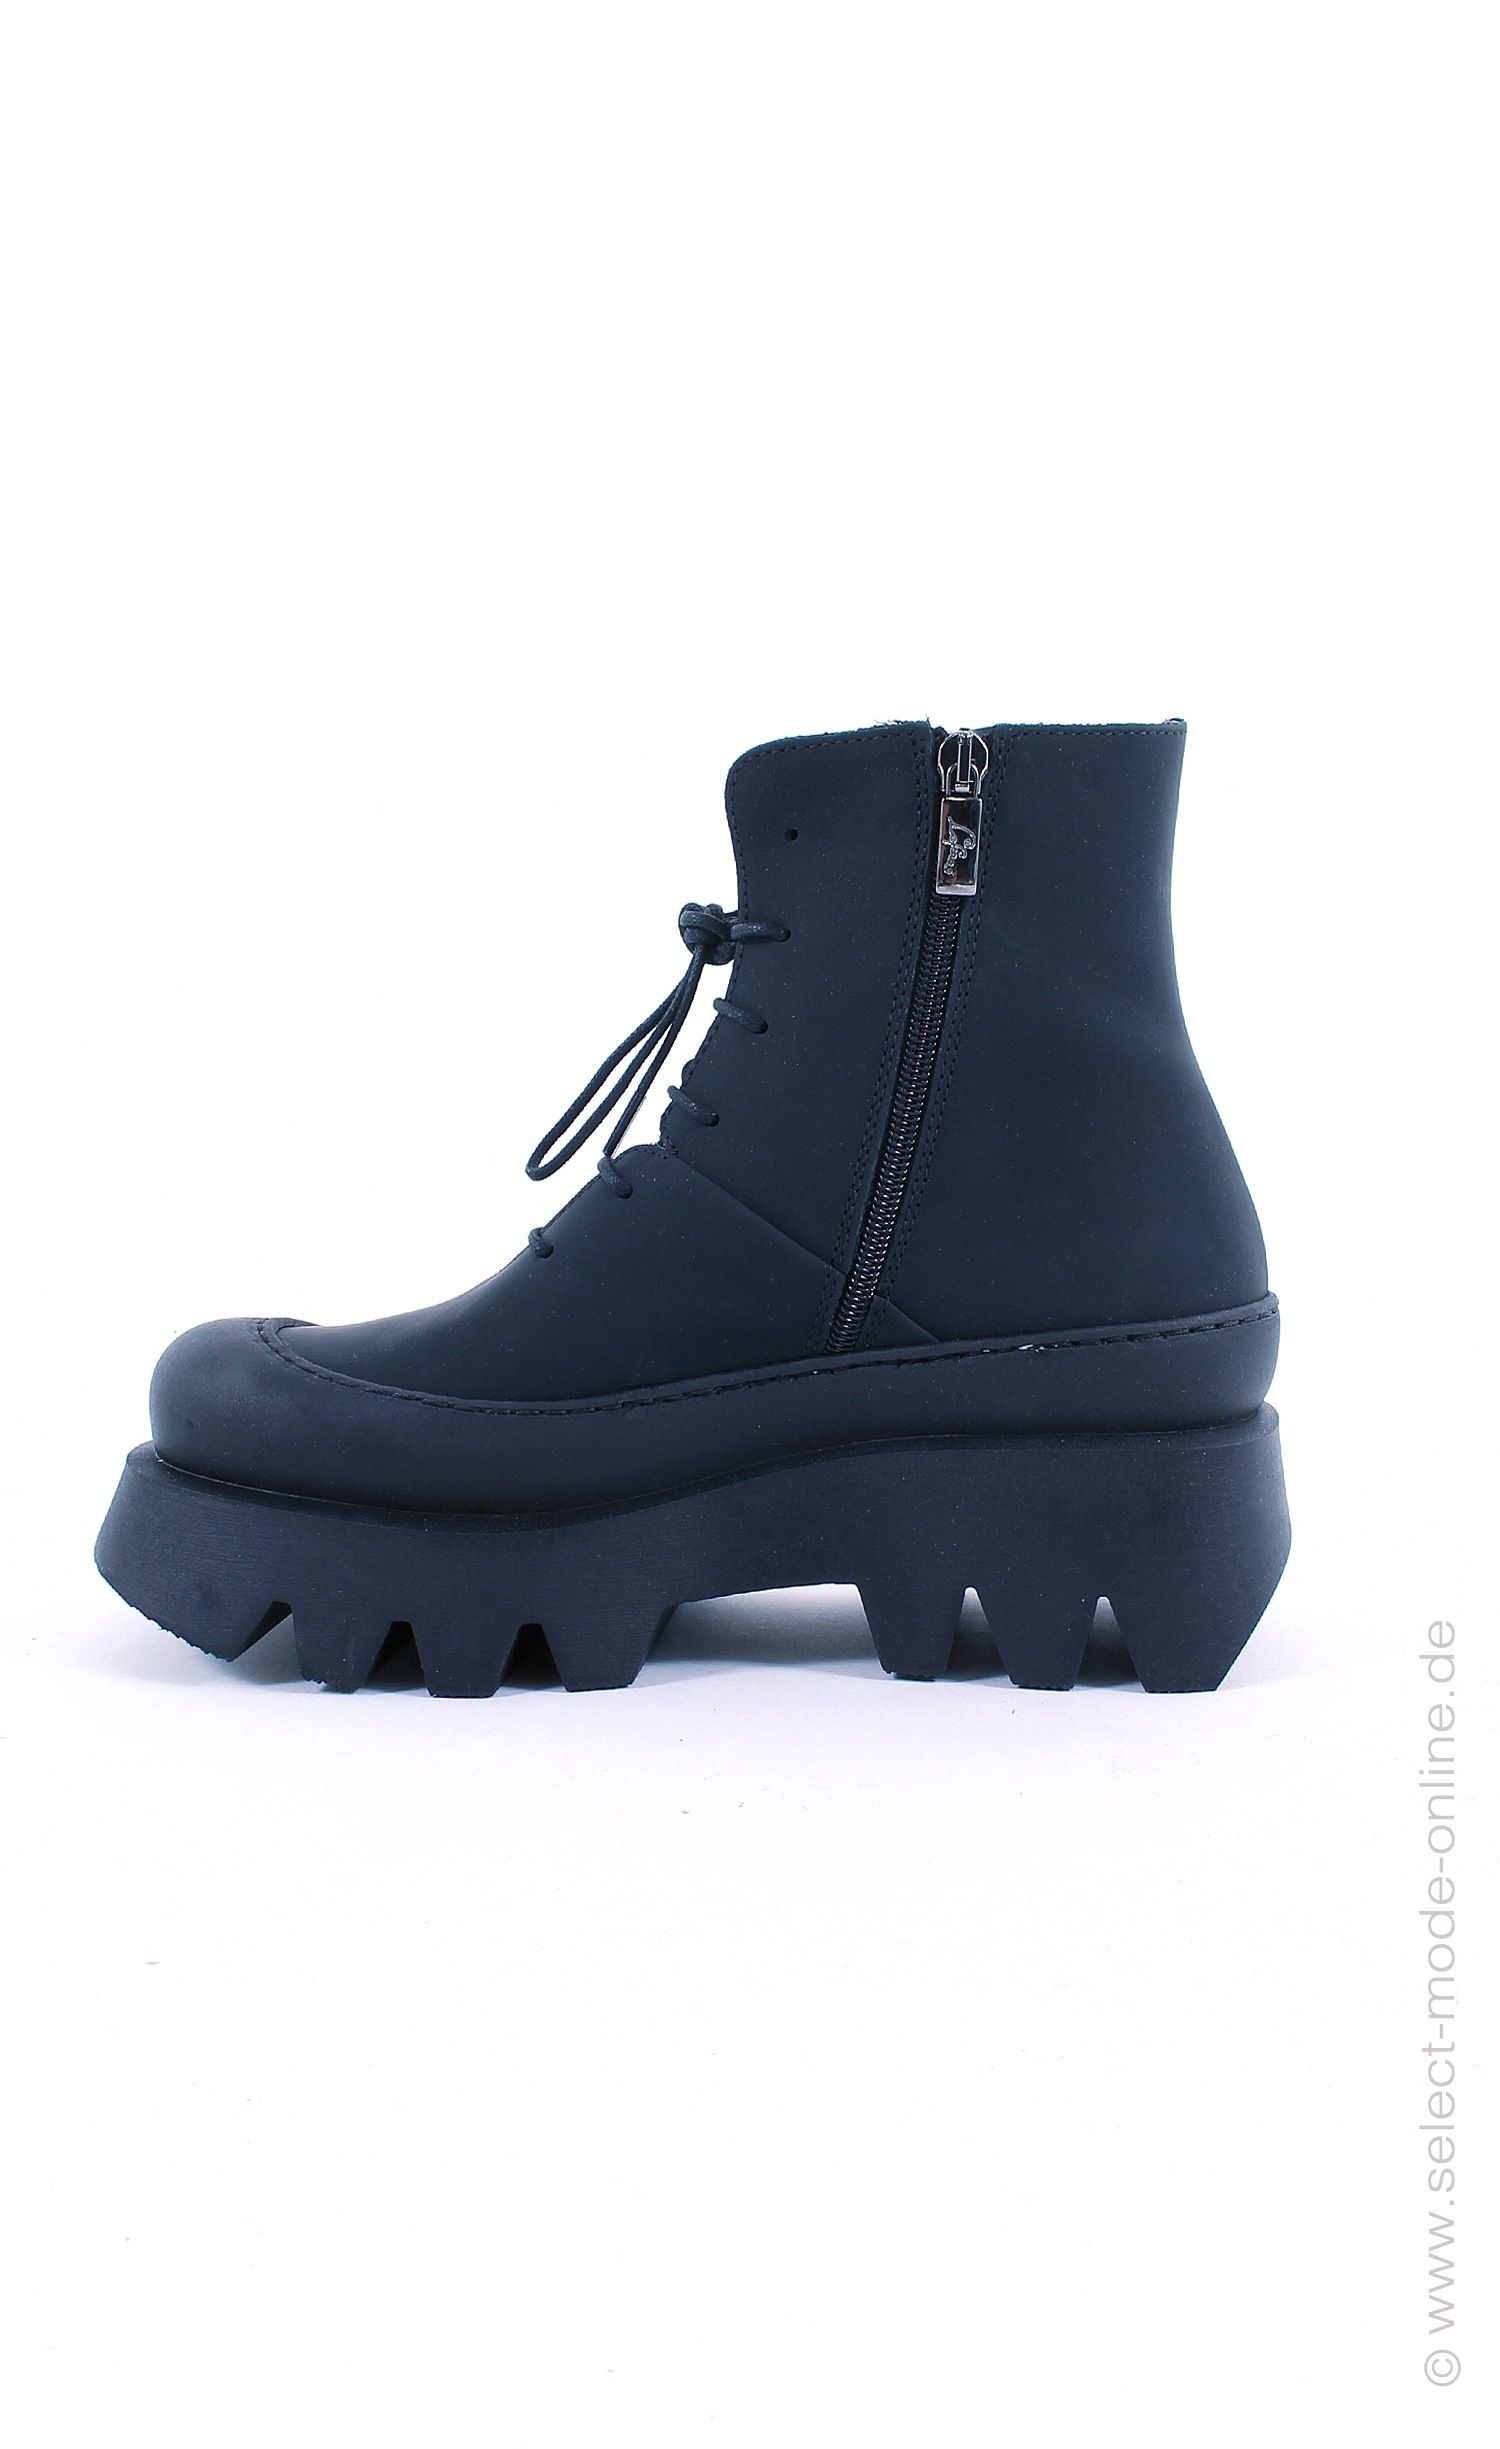 Coated leather boots - black - 2600